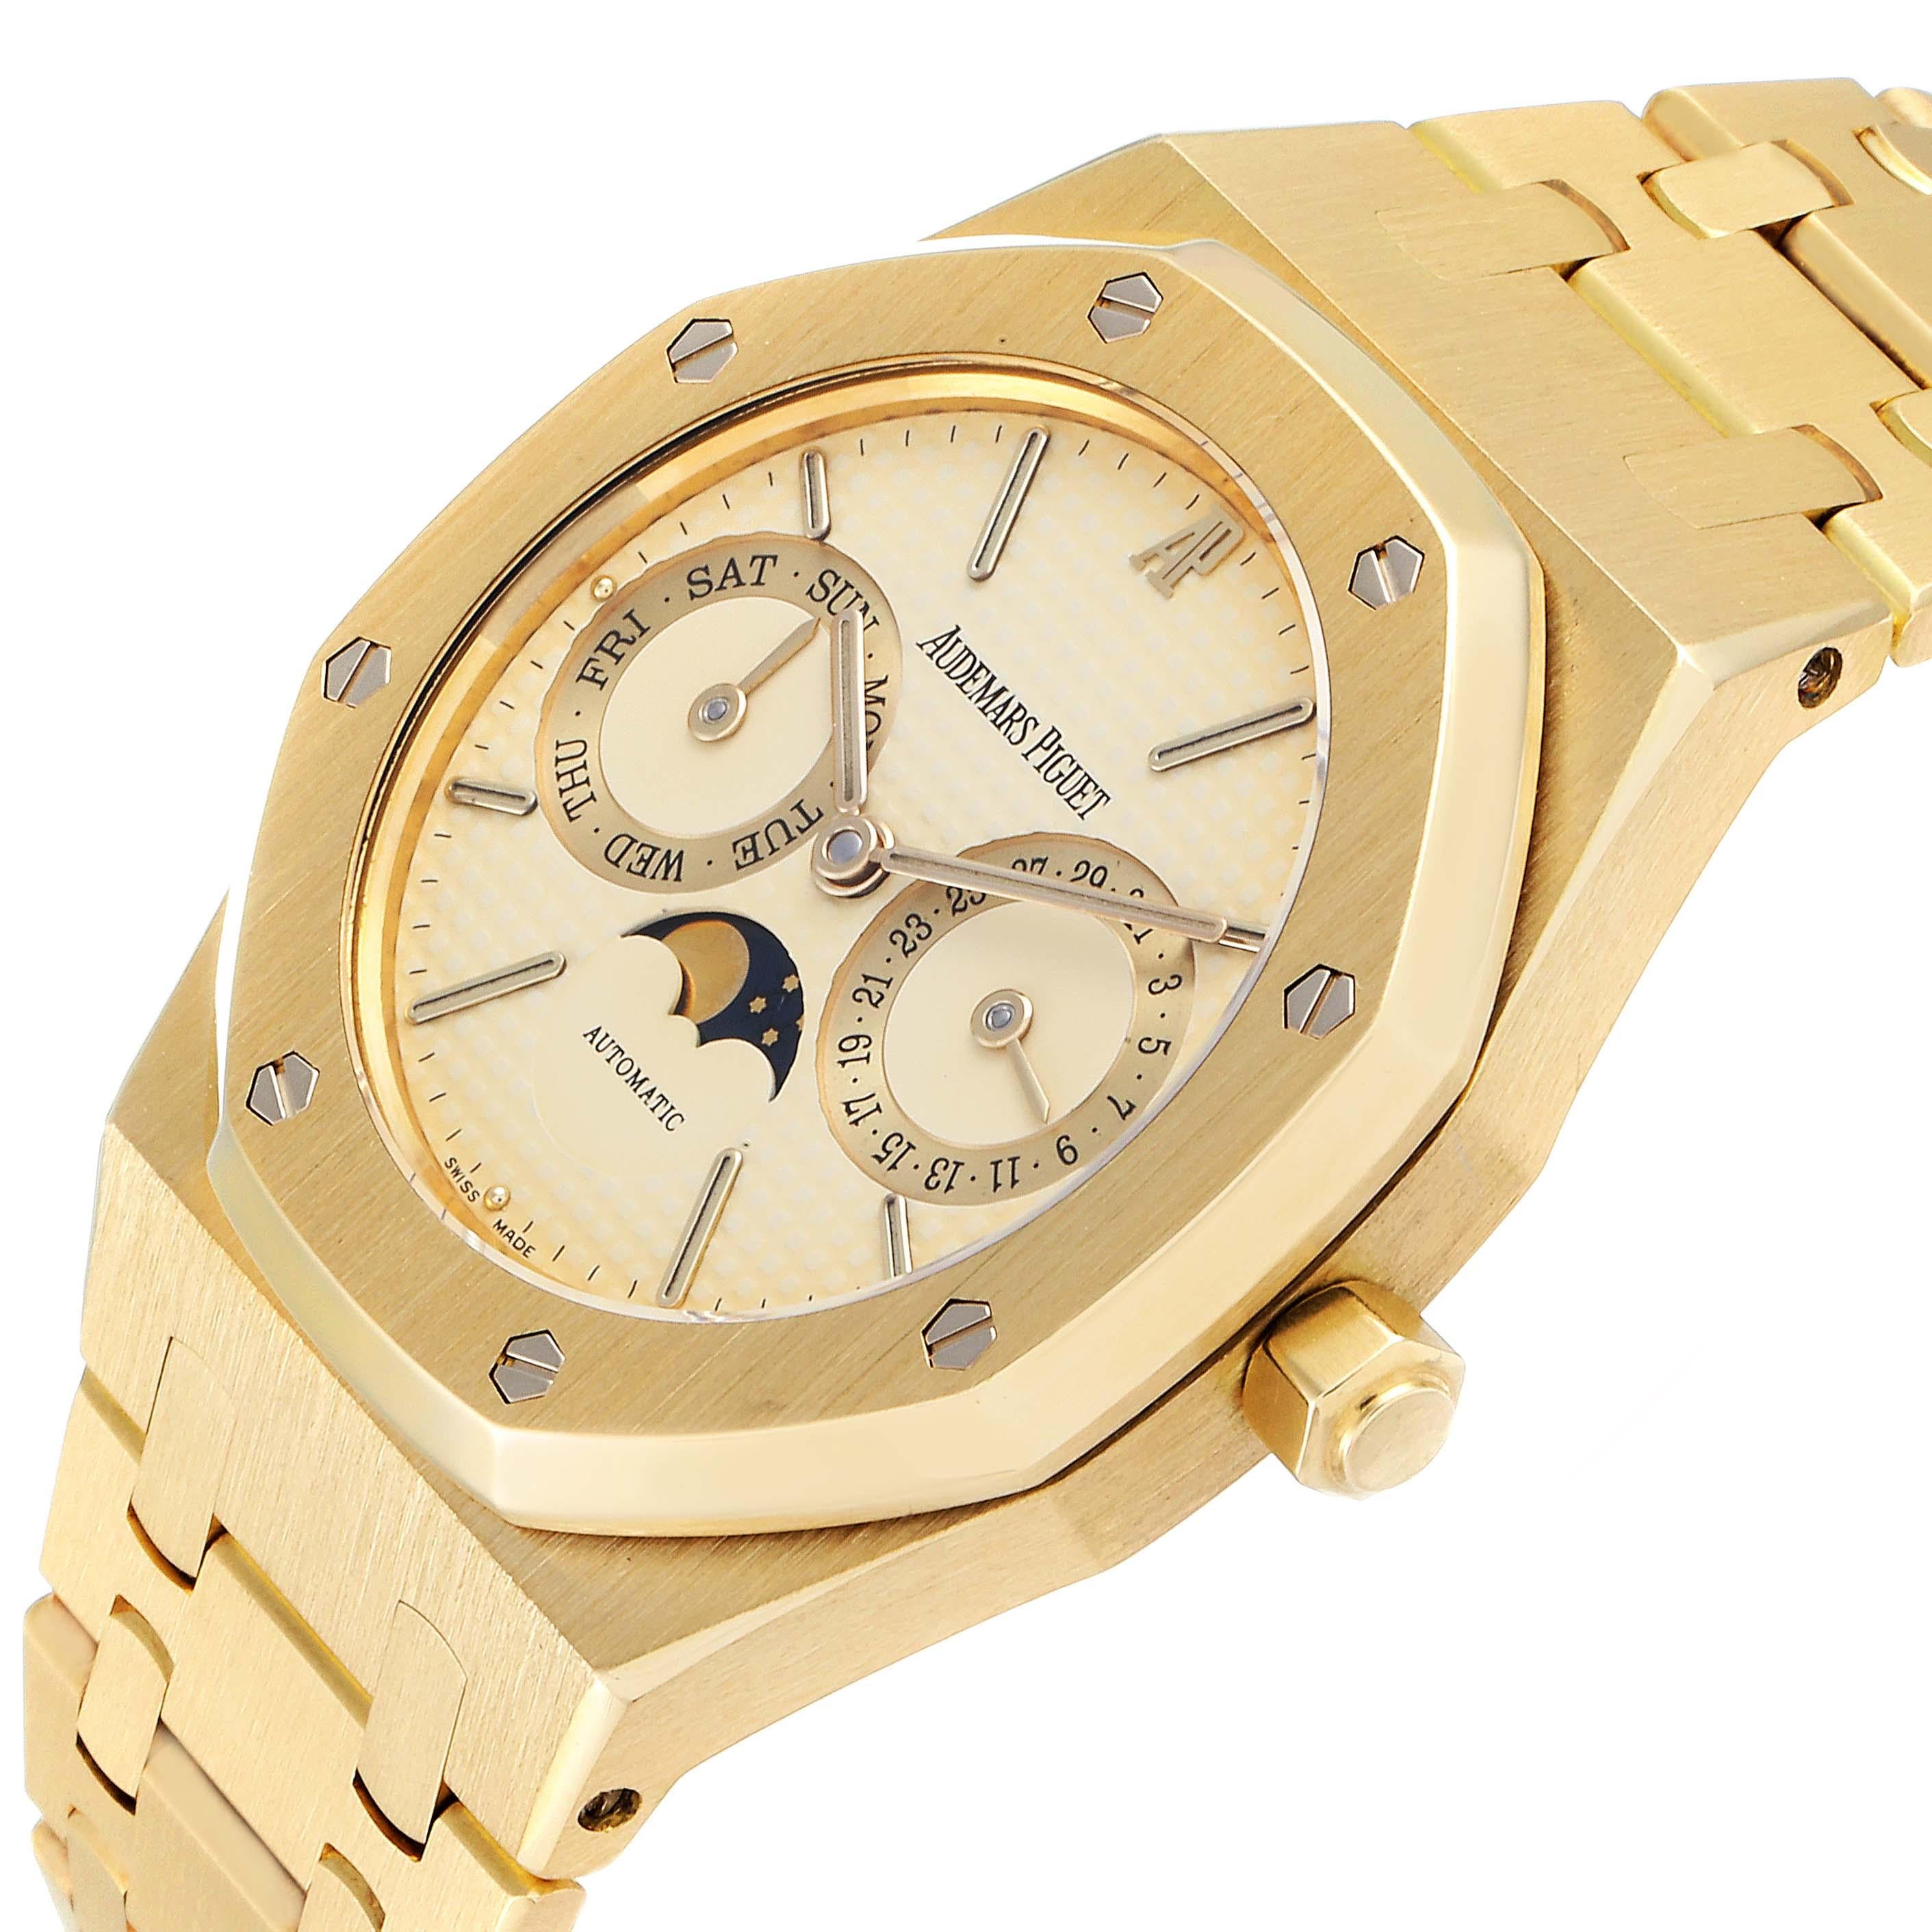 Audemars Piguet Royal Oak Yellow Gold Day Date Moonphase Mens Watch 25594 In Excellent Condition For Sale In Atlanta, GA